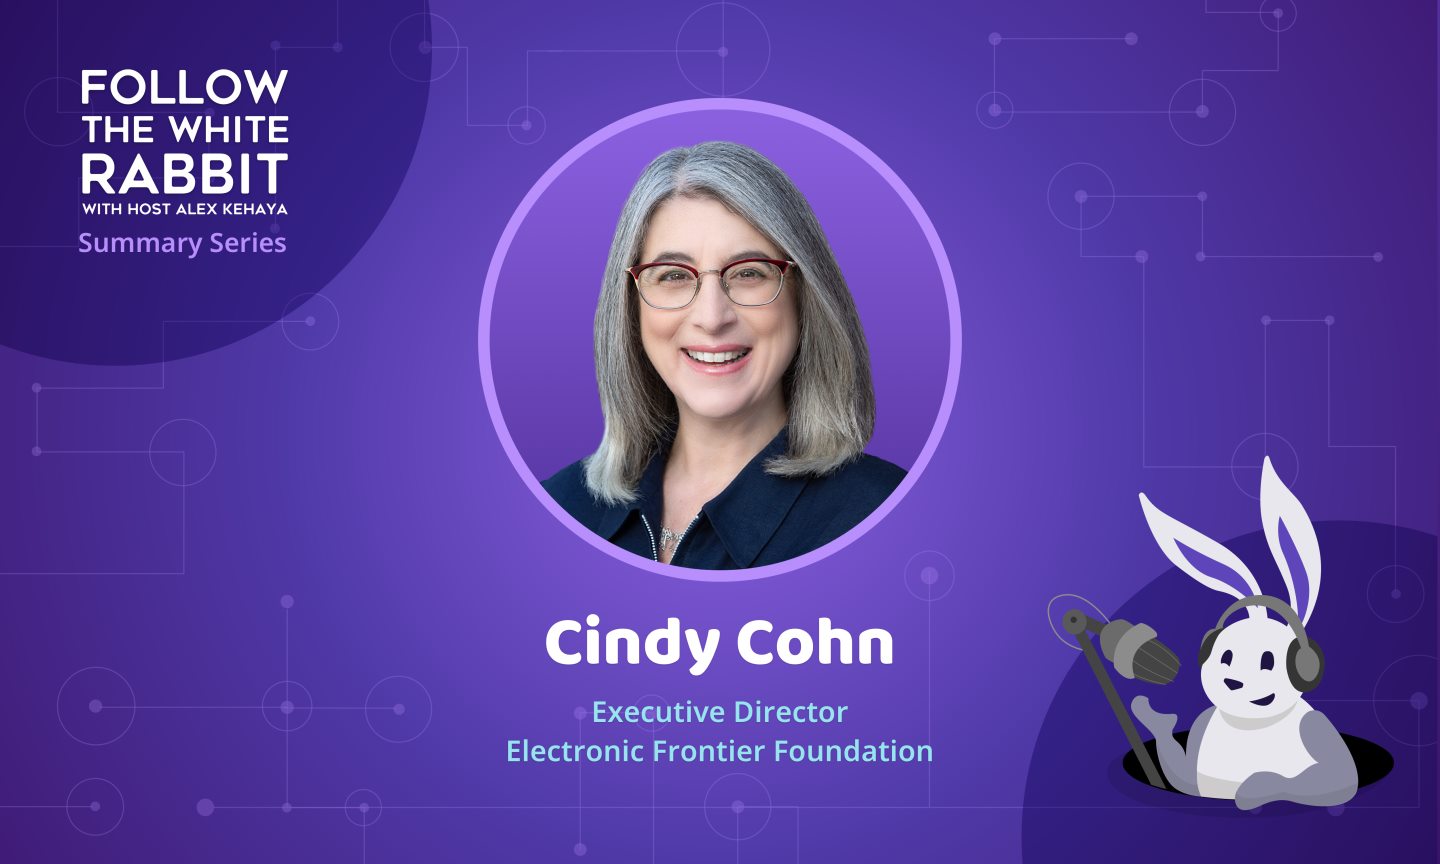 Cindy Cohn speaks with Orchid about online privacy and the Fourth Amendment